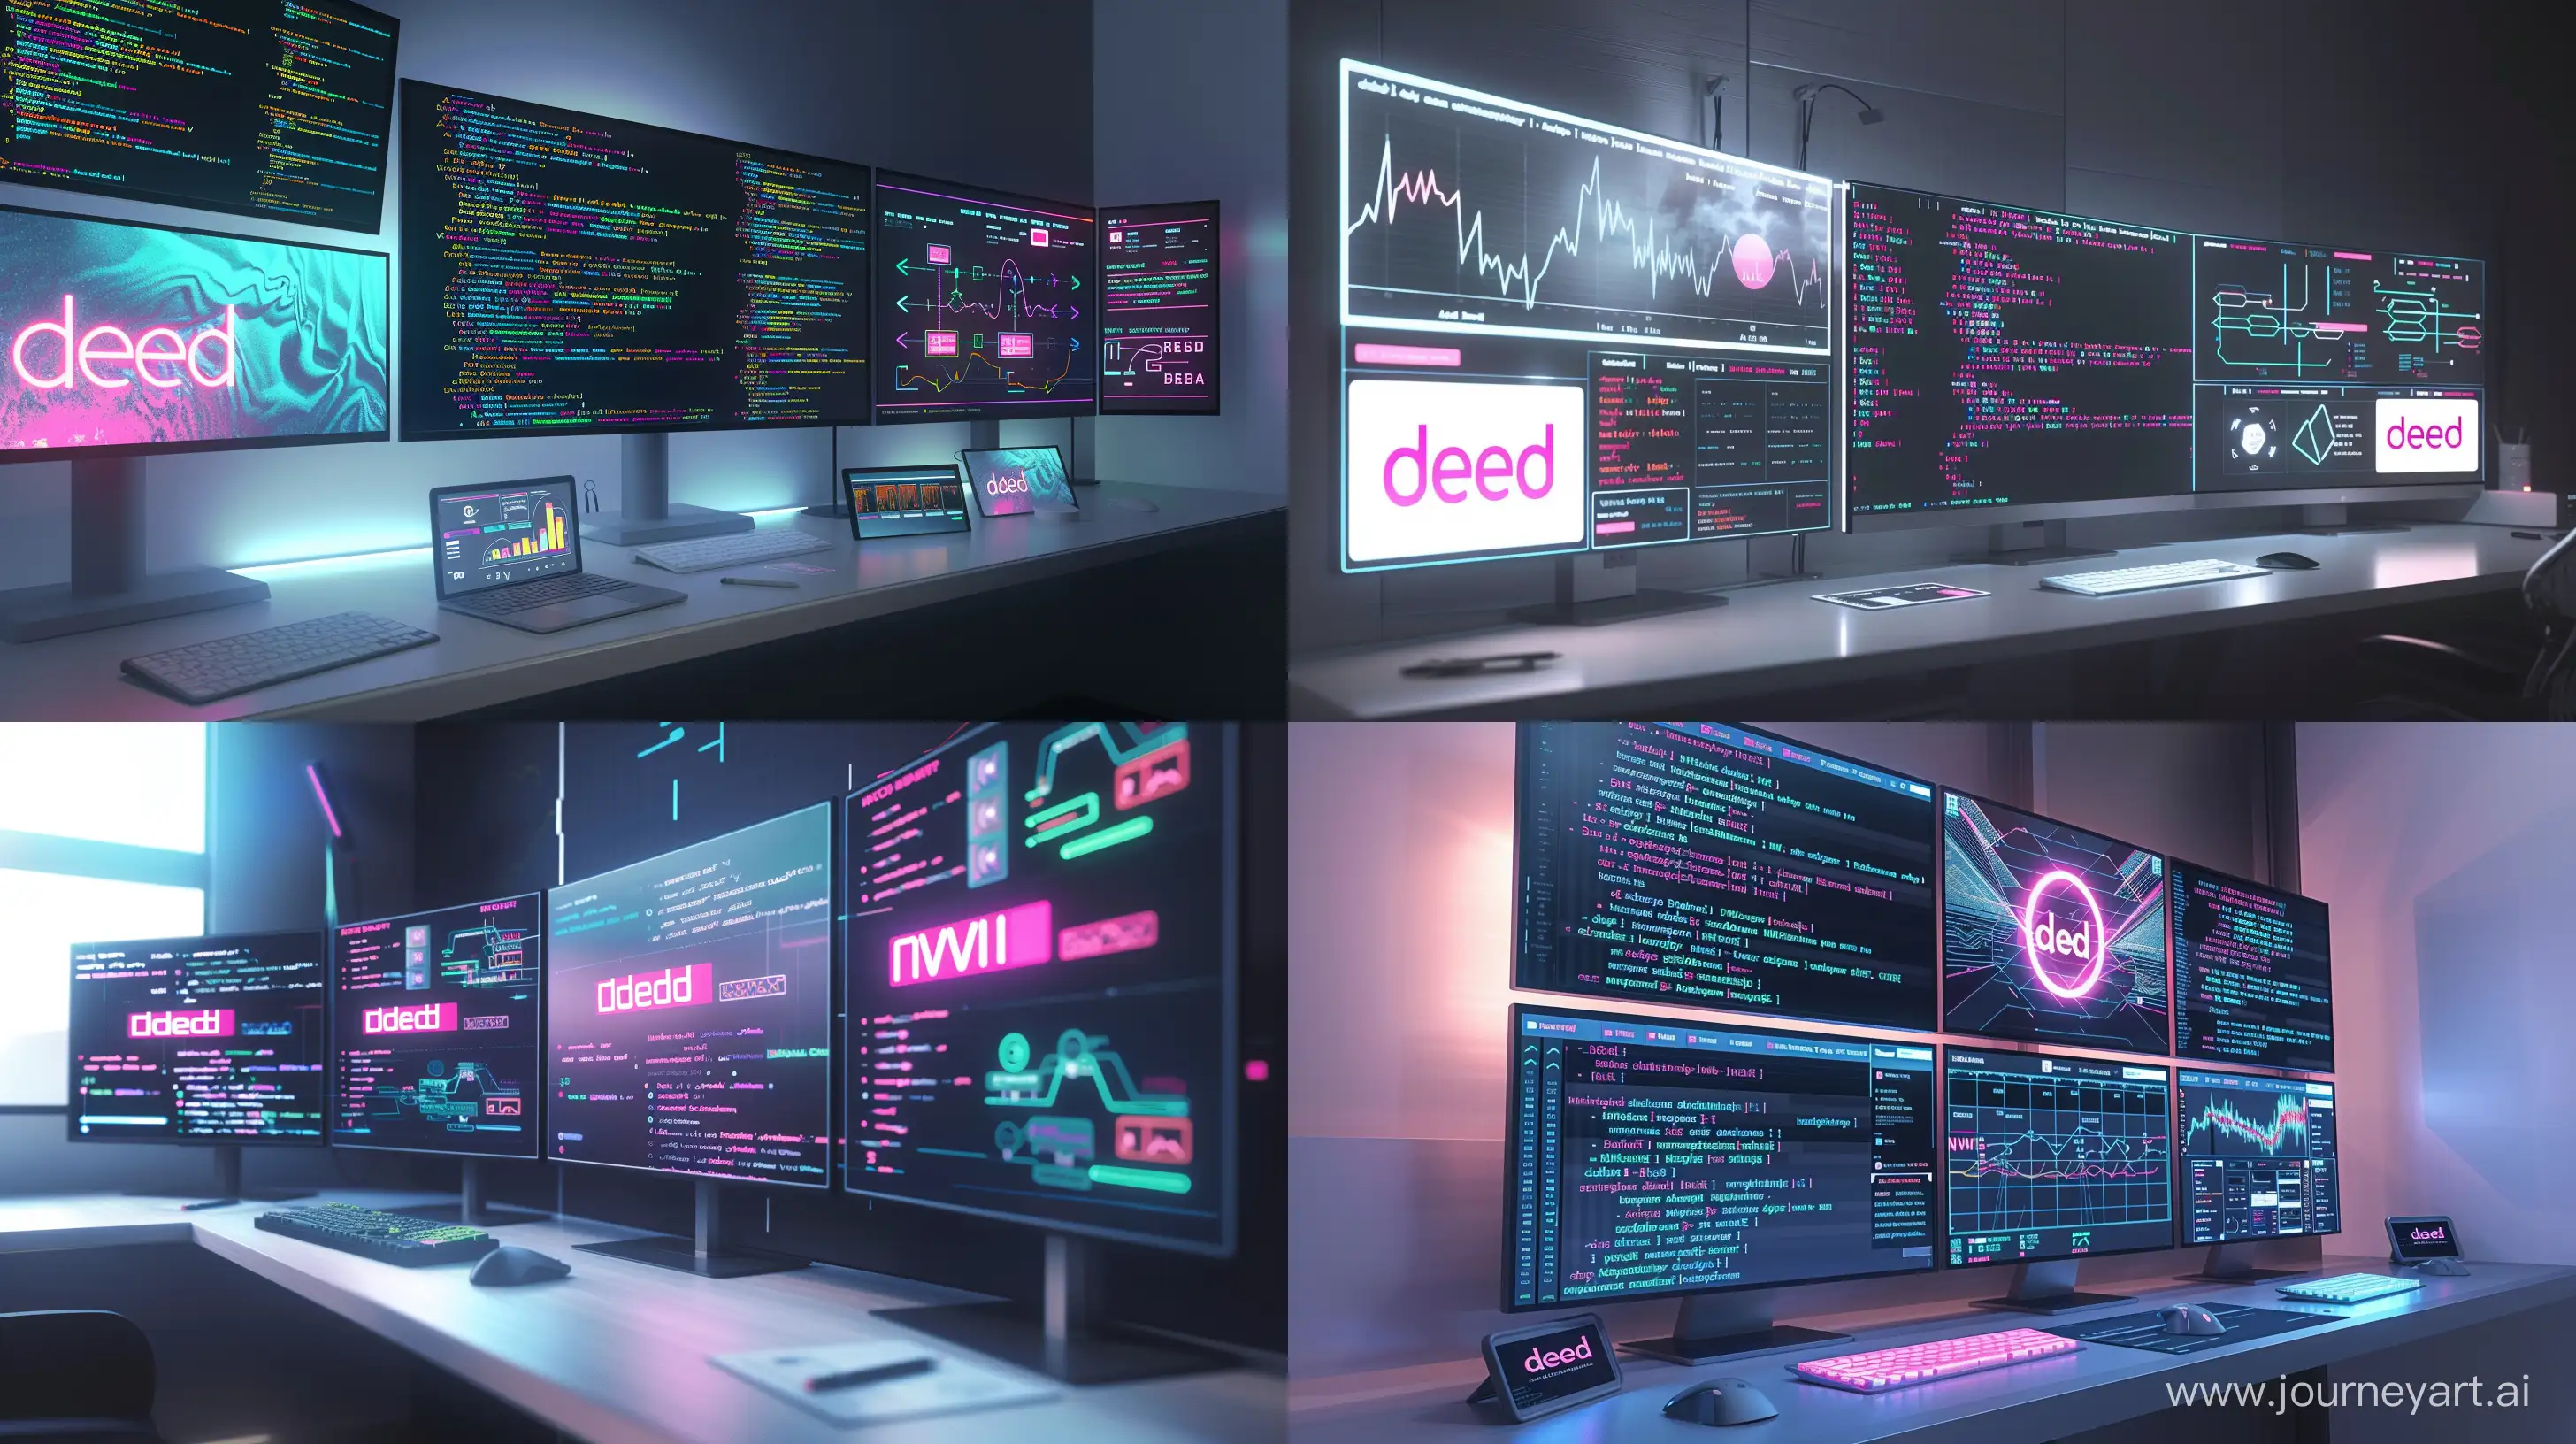 Digital artwork of a futuristic workspace for a machine learning engineer working on the "deed" app, featuring a sleek main display with complex code snippets glowing in soft neon colors, emphasizing the cutting-edge nature of inference services and search systems. To the side, a secondary screen showcases an image feed, vibrant and dynamic, representing real-time data processing and AI-driven content curation, with the "deed" logo prominently displayed in pink on a white background, symbolizing the brand's identity. Another monitor displays intricate Graphana monitoring graphs and charts, highlighting system performance and operational metrics in vivid colors. A fourth display presents a detailed diagram including Redis, NVIDIA, Mongo, and RabbitMQ components, interconnected to depict the sophisticated architecture behind the high-performance systems. The environment is bathed in ambient light, casting soft shadows and creating a mood of focused innovation. The composition is carefully balanced, with each element positioned to guide the viewer through the various aspects of machine learning engineering work, blending technical precision with artistic flair --ar 16:9